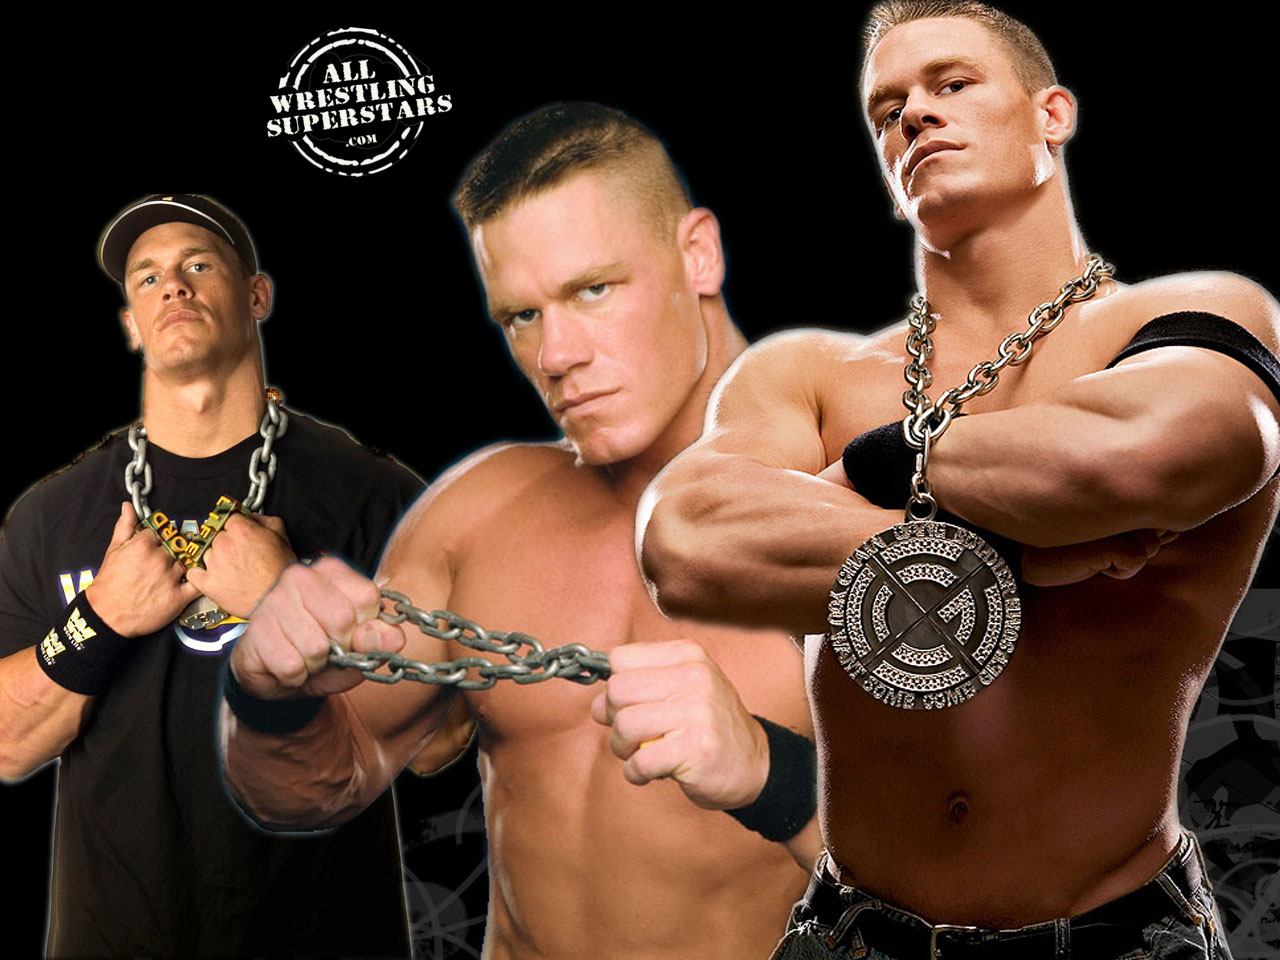 Chain Gang Mander John Cena In A Pose With His Heavy Click